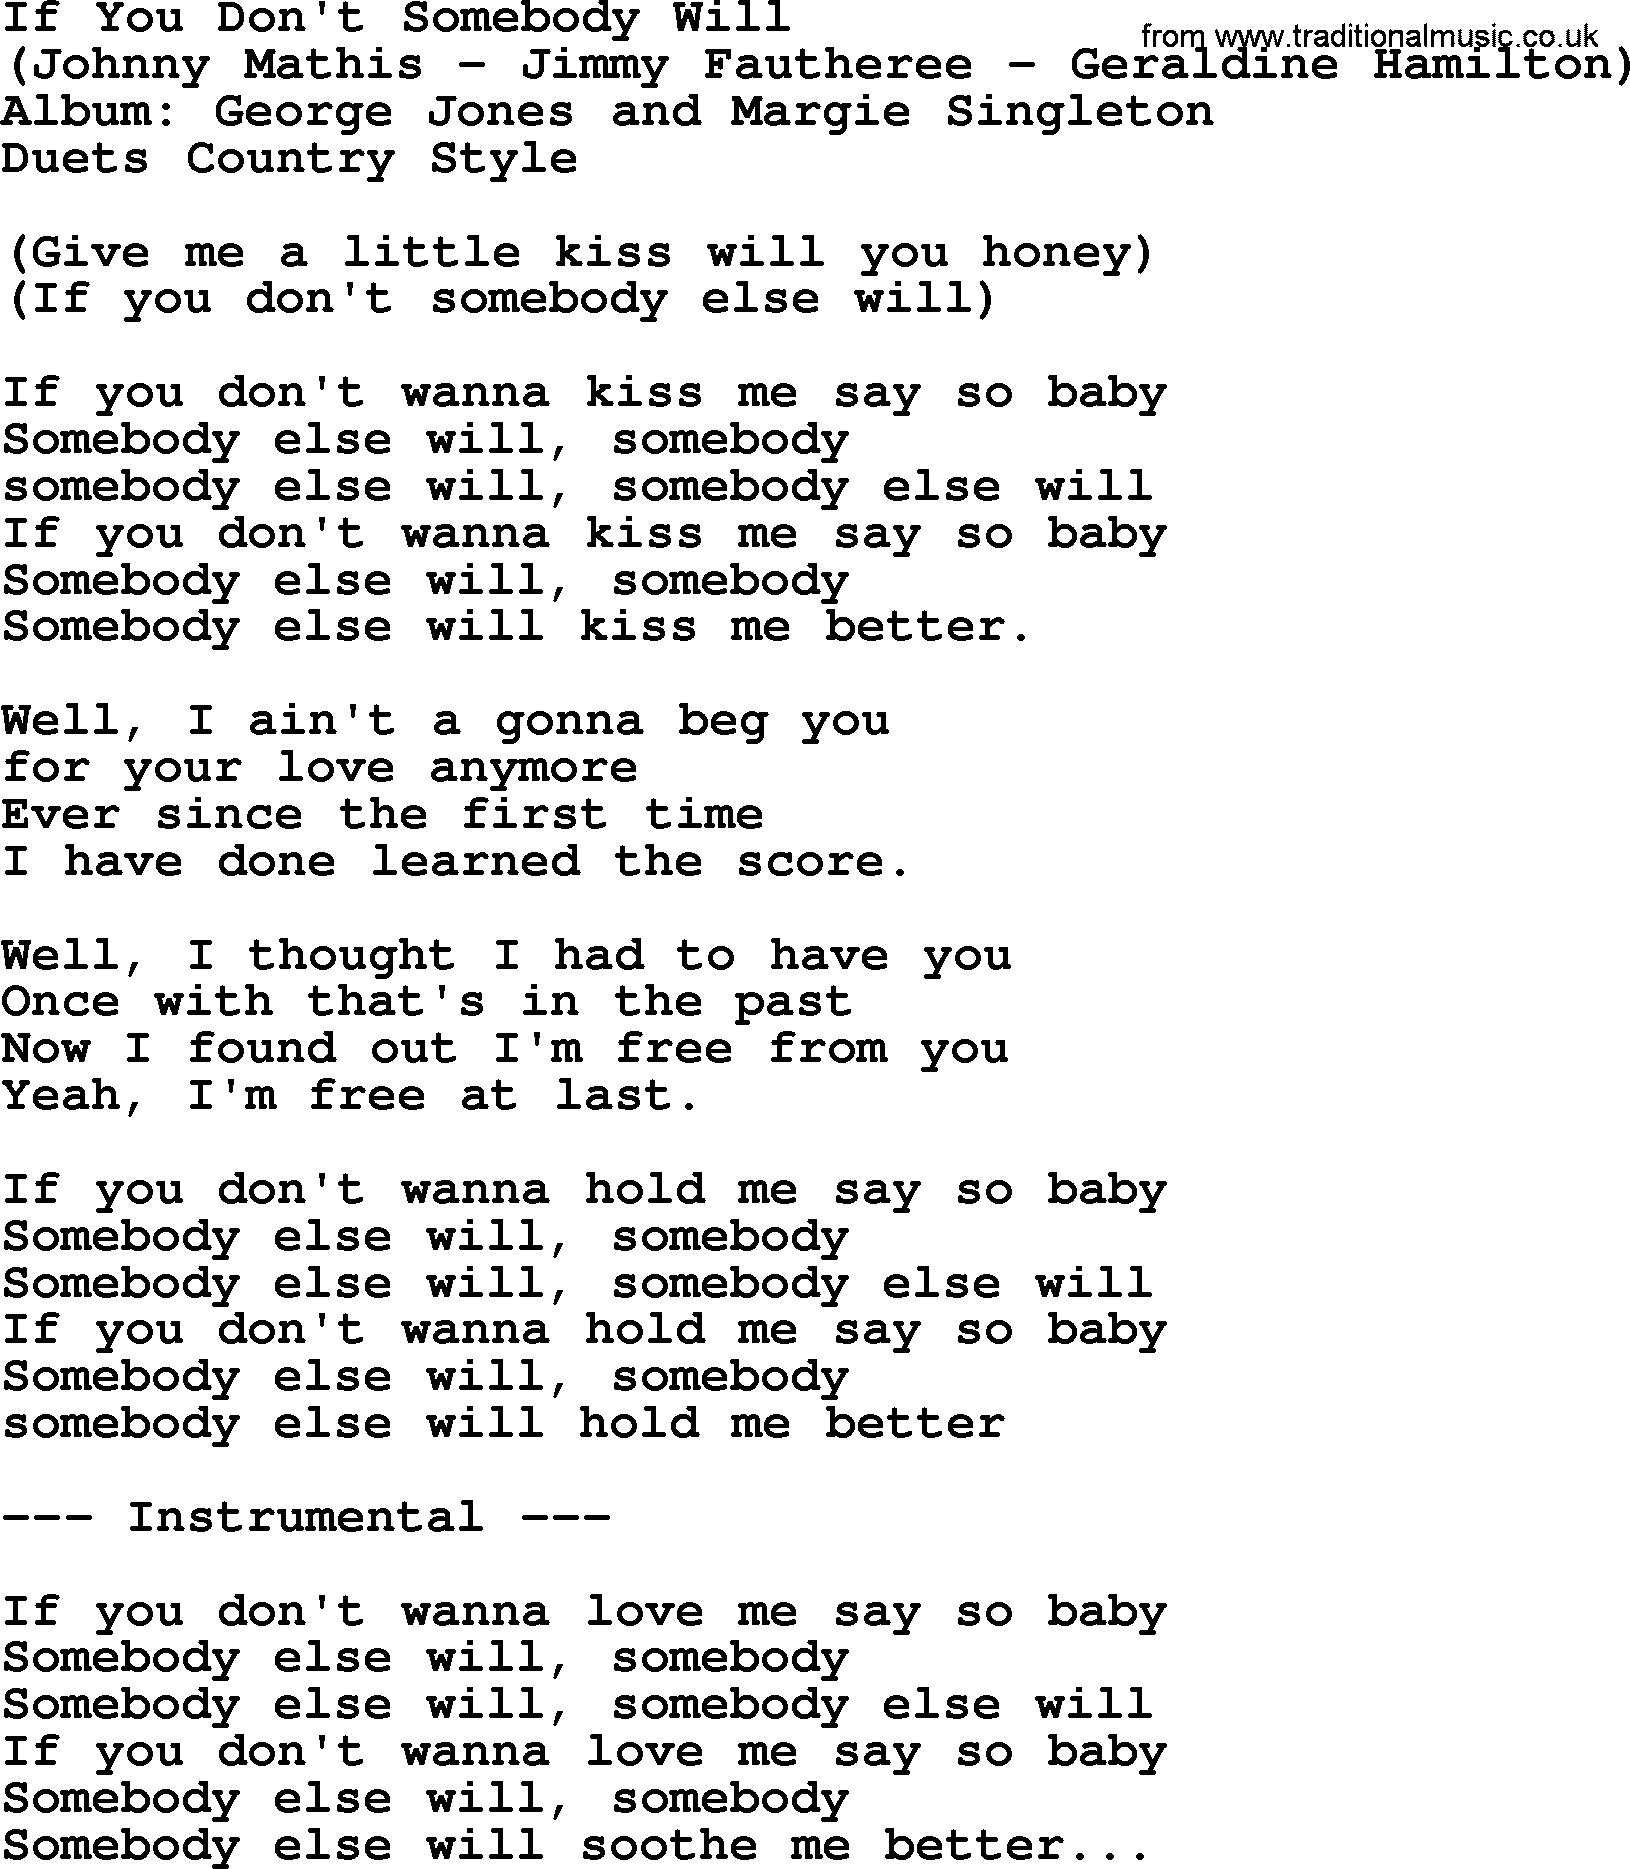 George Jones song: If You Don't Somebody Will, lyrics